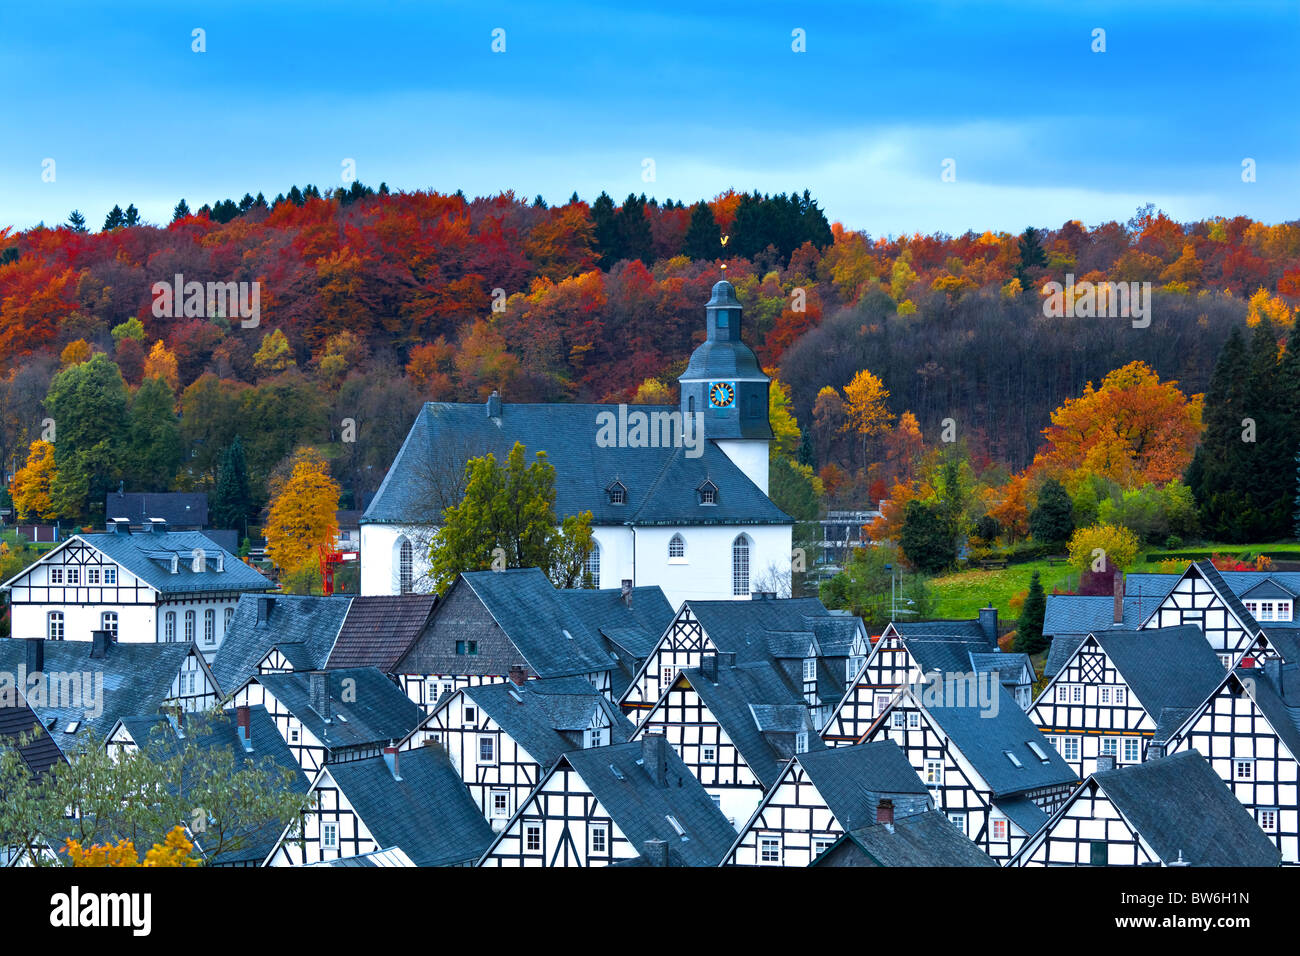 Half-timbered houses in Freudenberg, Germany Stock Photo